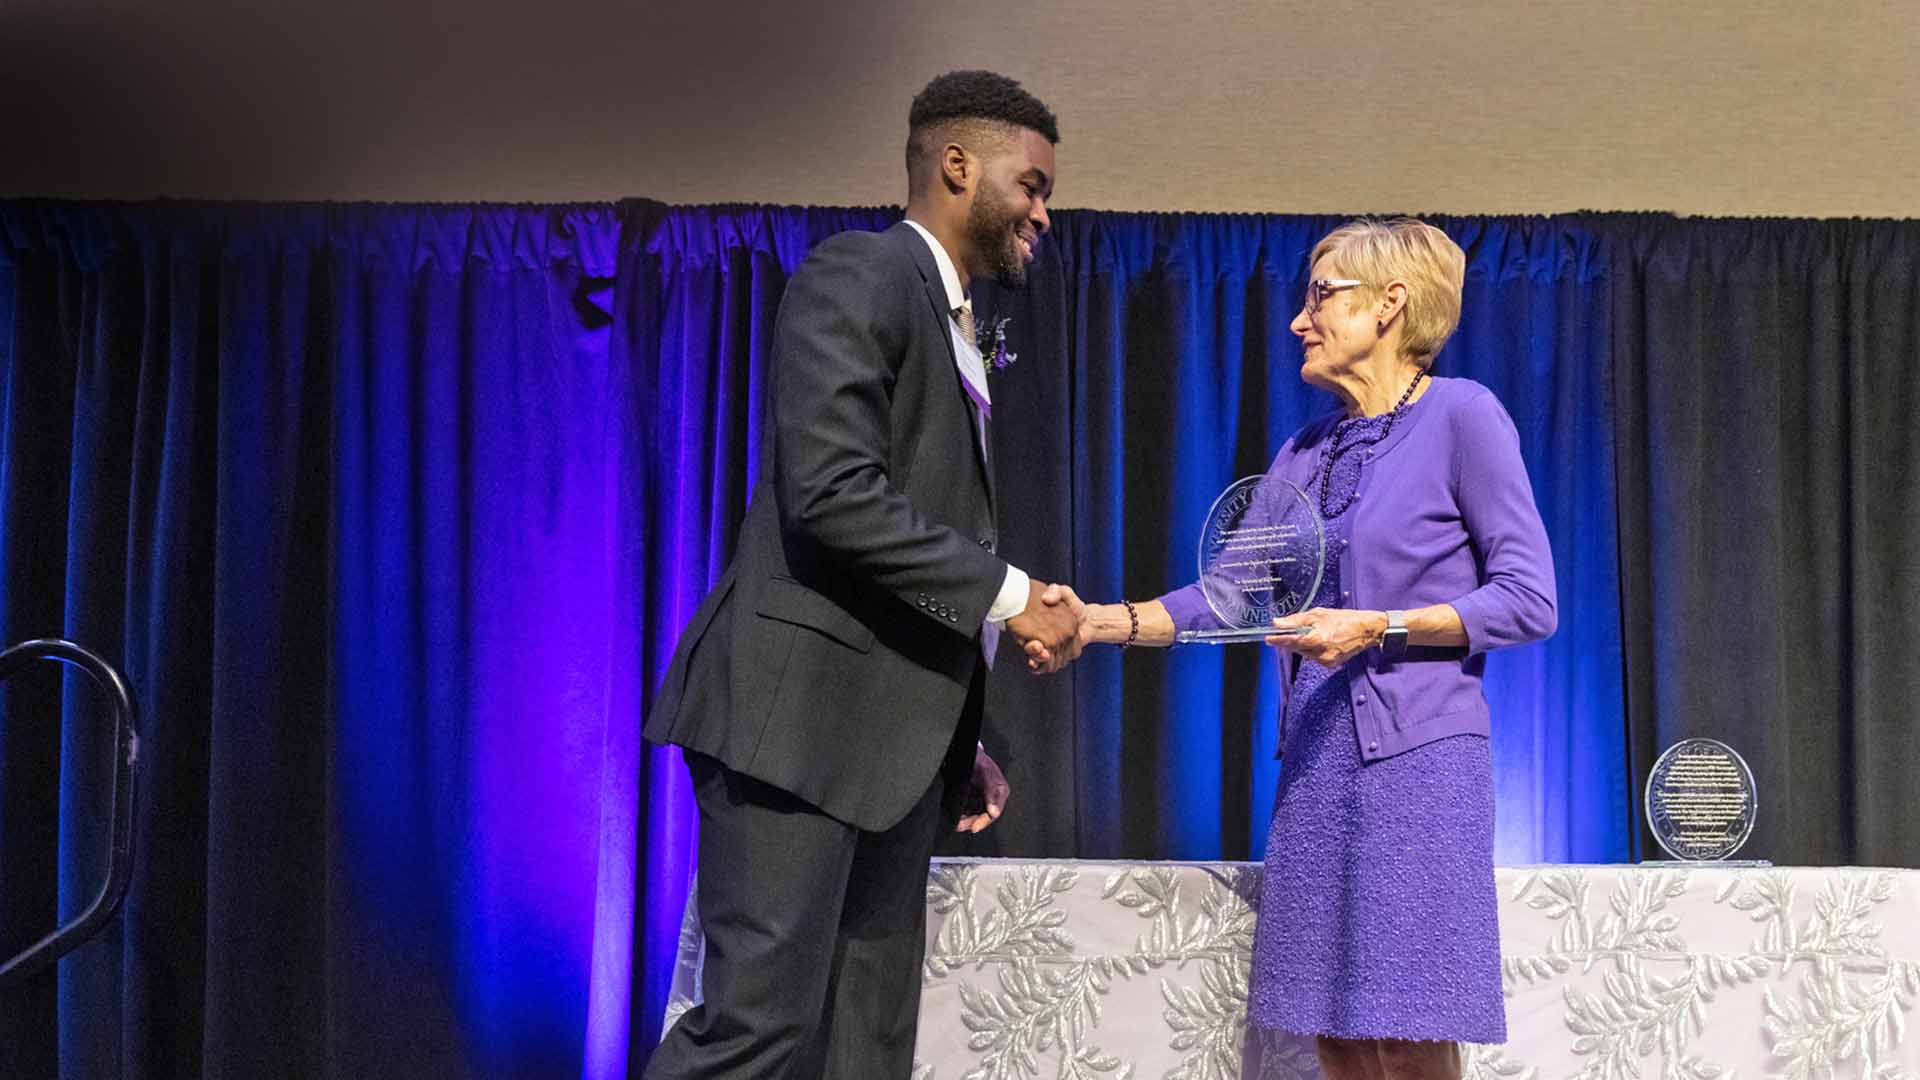 Tommie Award recipient shaking hands with president